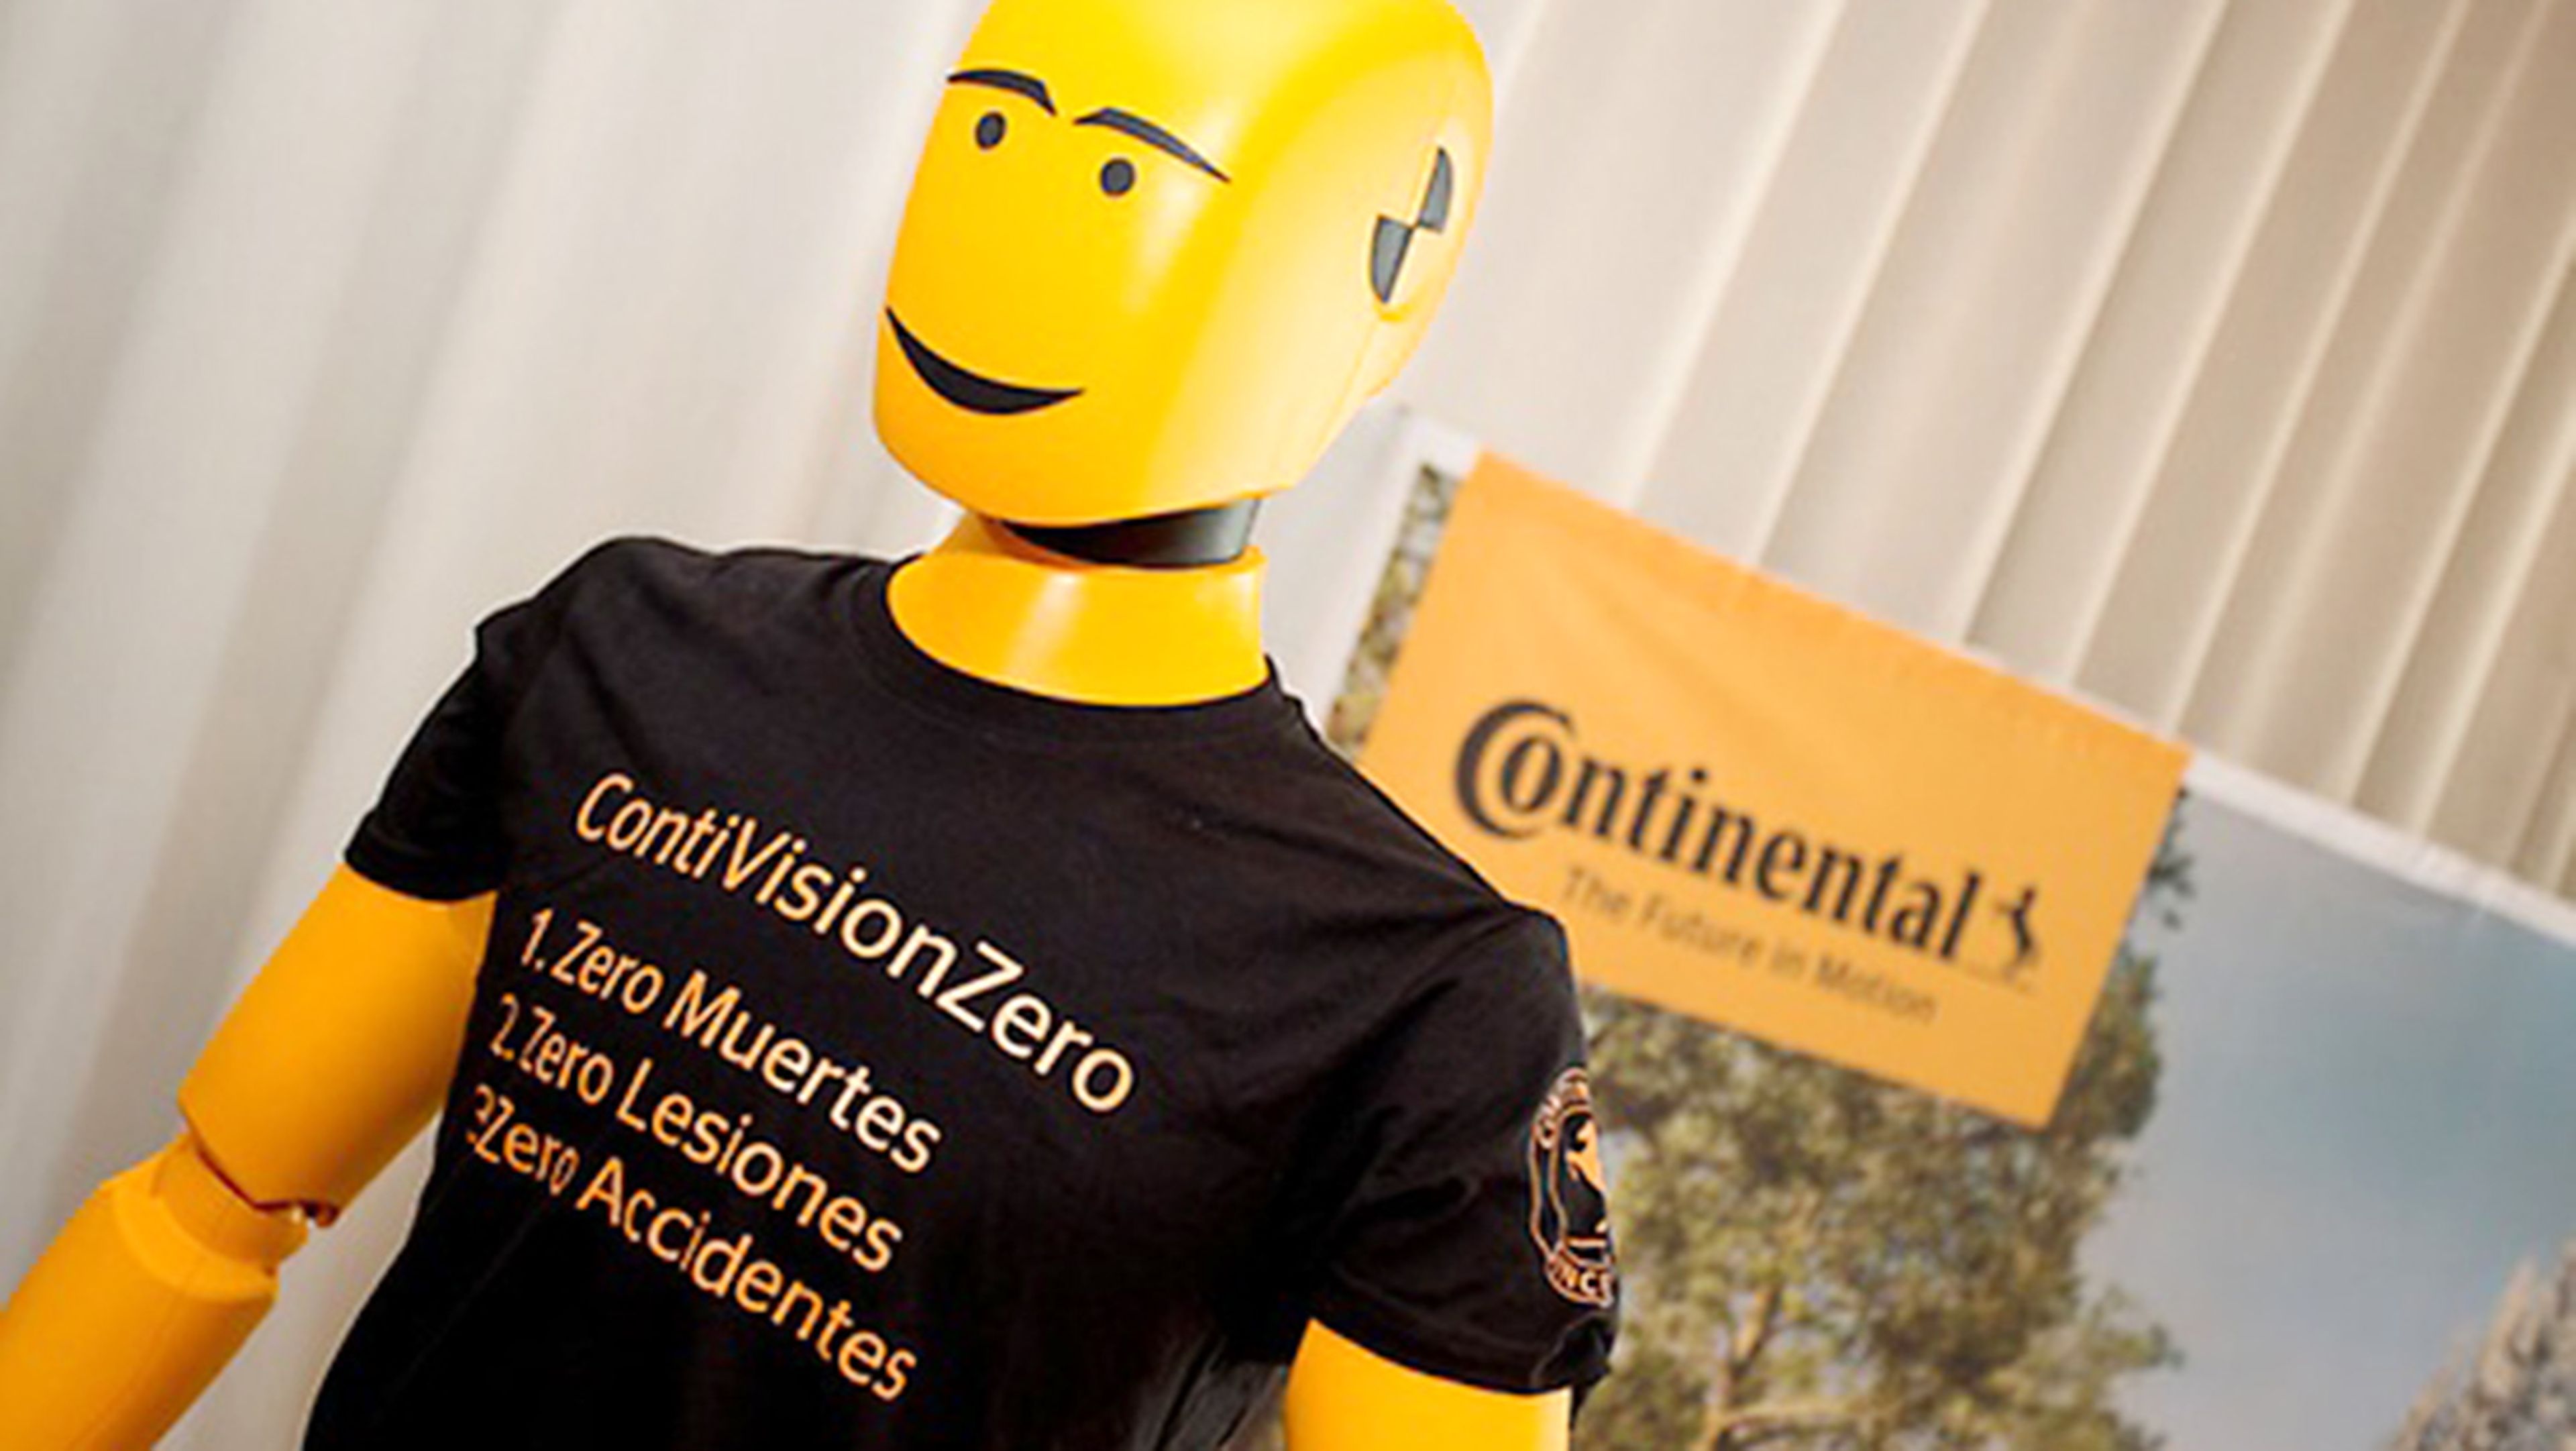 VisionZero by Continental